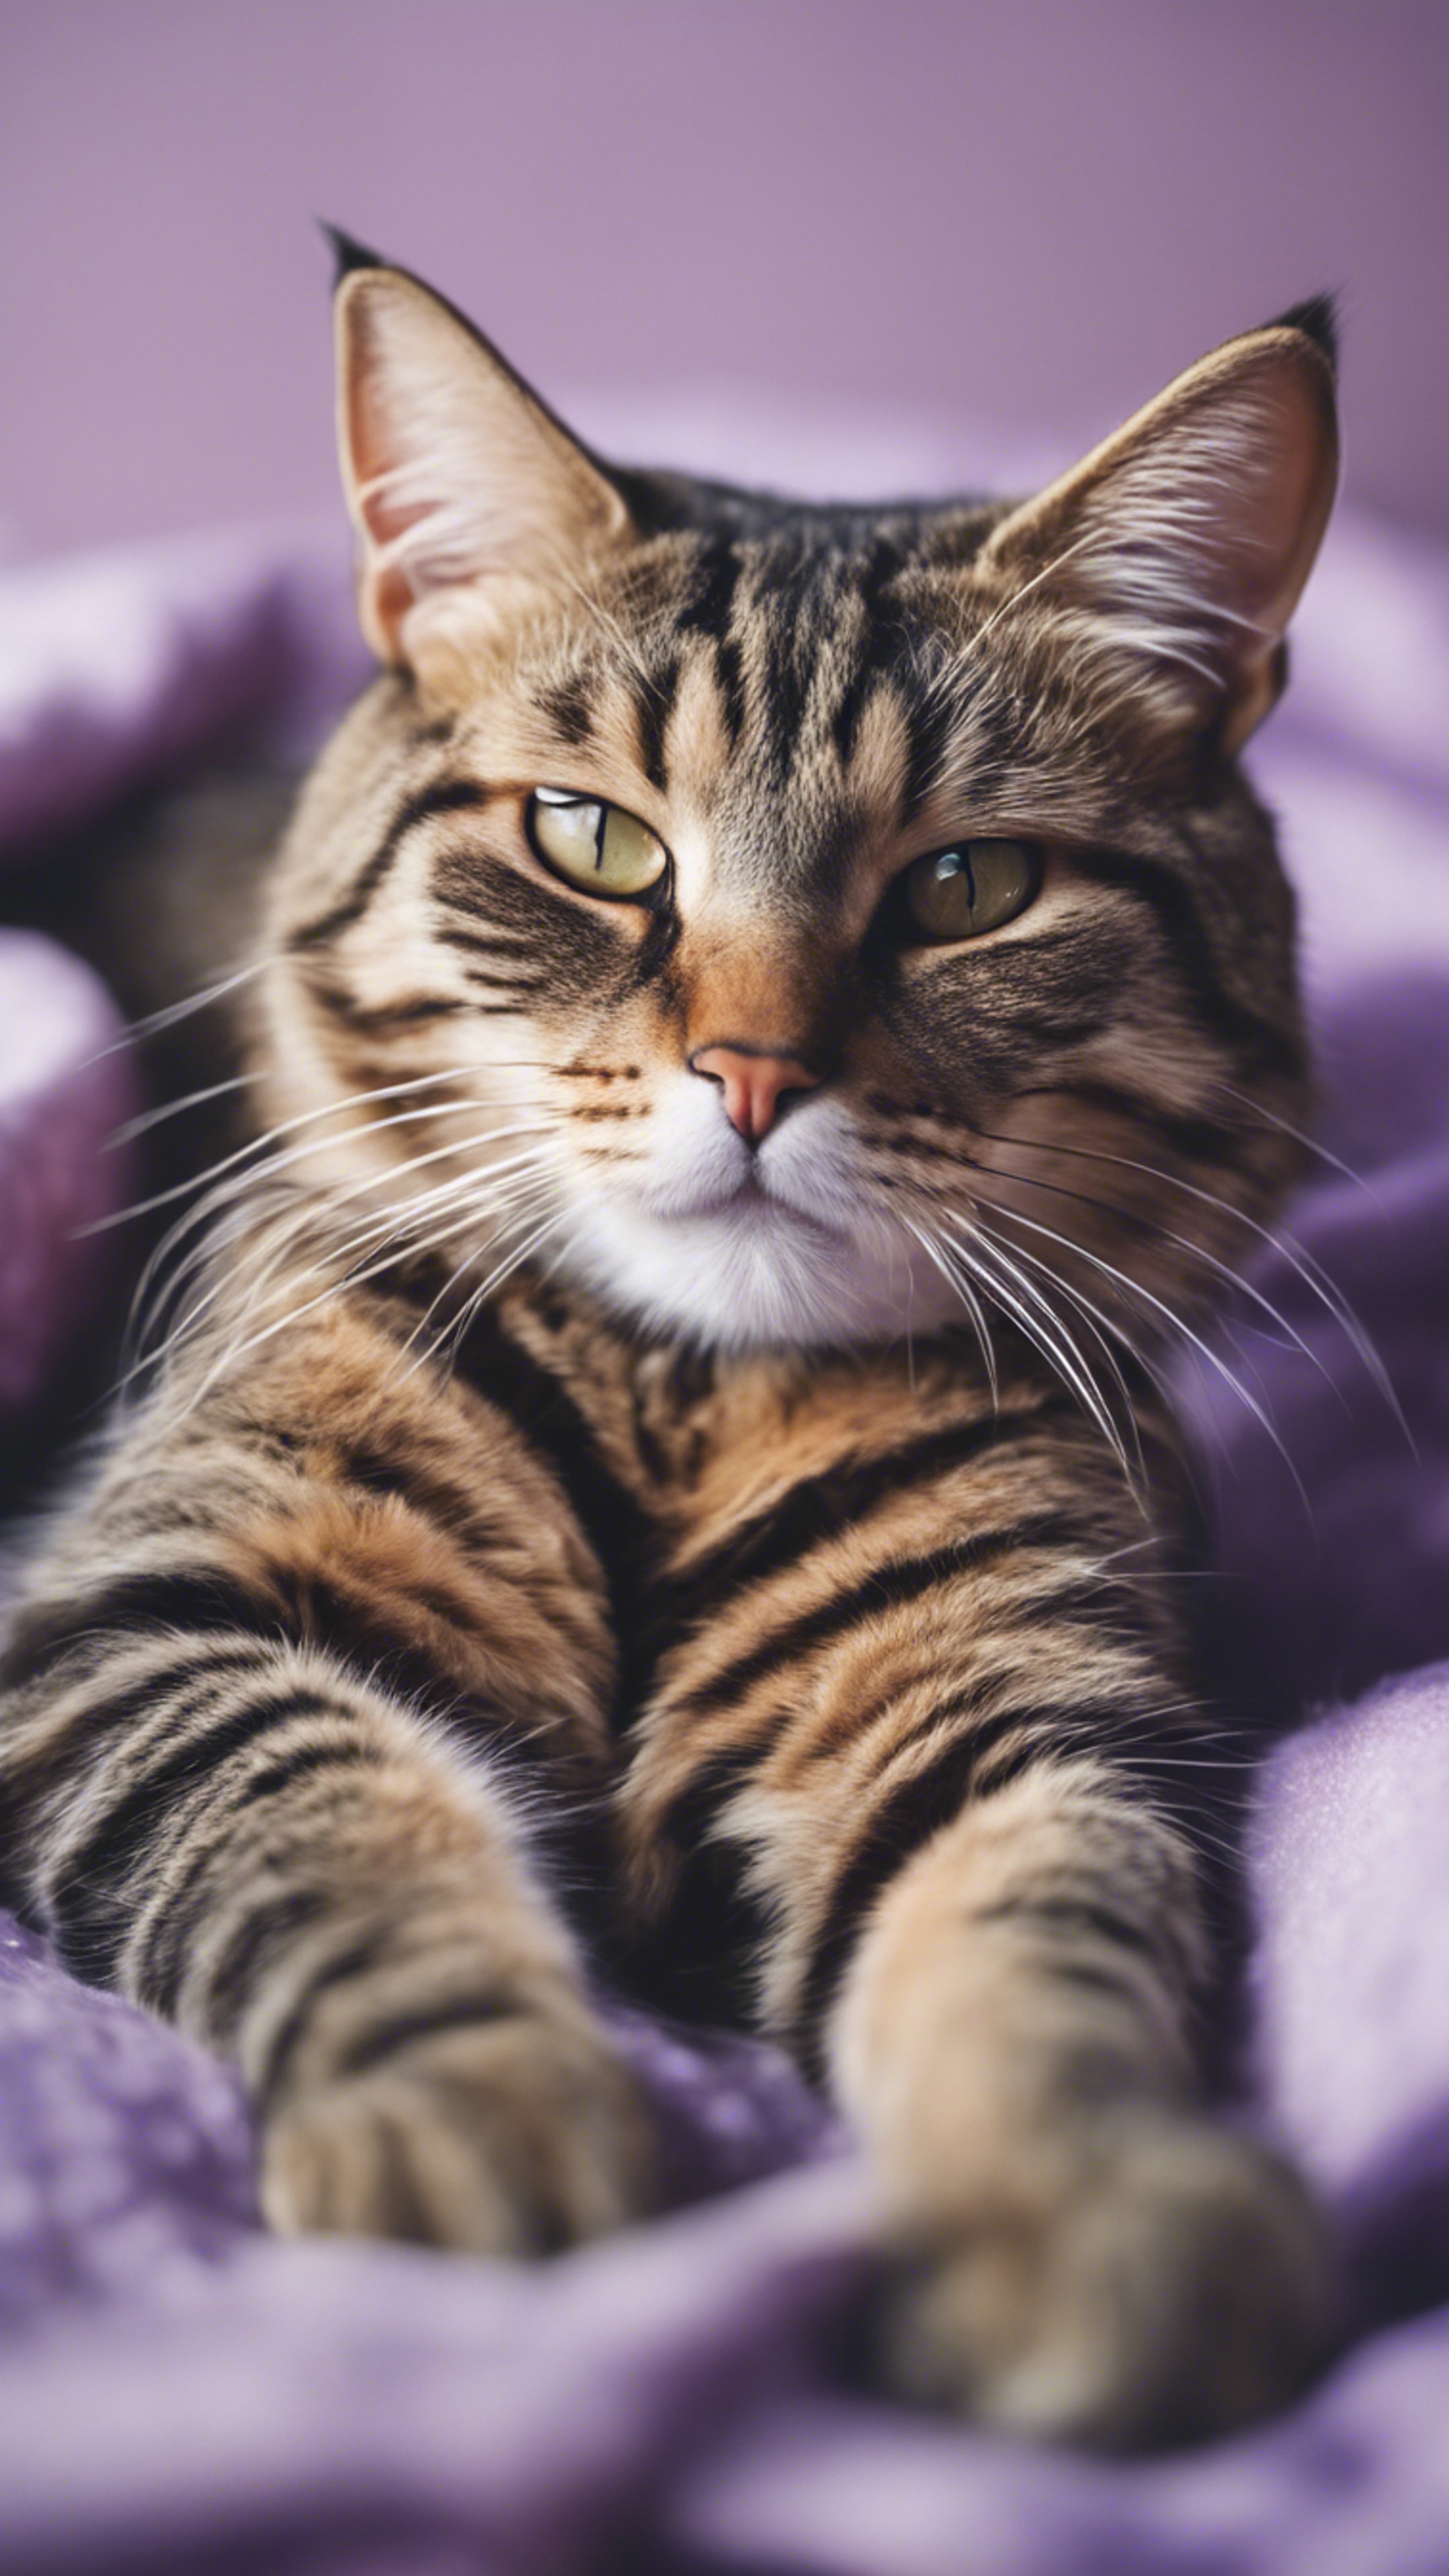 A candid portrait of a tabby cat lounging on a pastel purple blanket. Обои[f4cf510d1a1d426195dc]